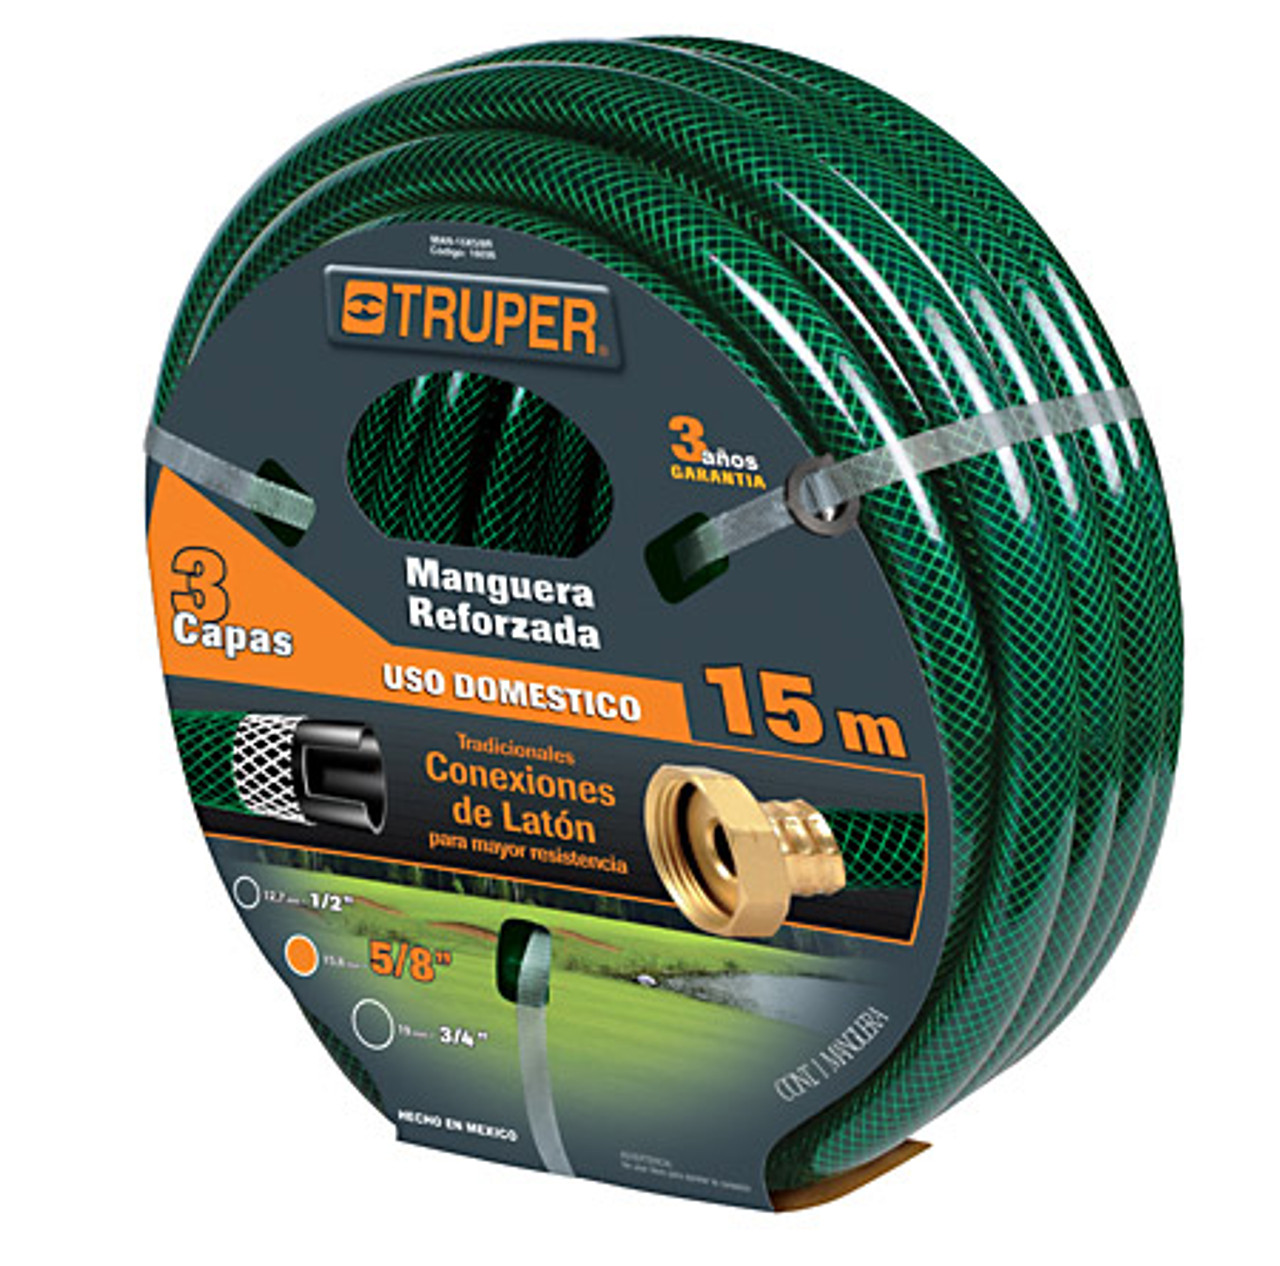 Truper 3-Ply Reinforced Hoses w/ Metal Couplings, 82 Ft 5/8" 3 Ply Water Hose #16037